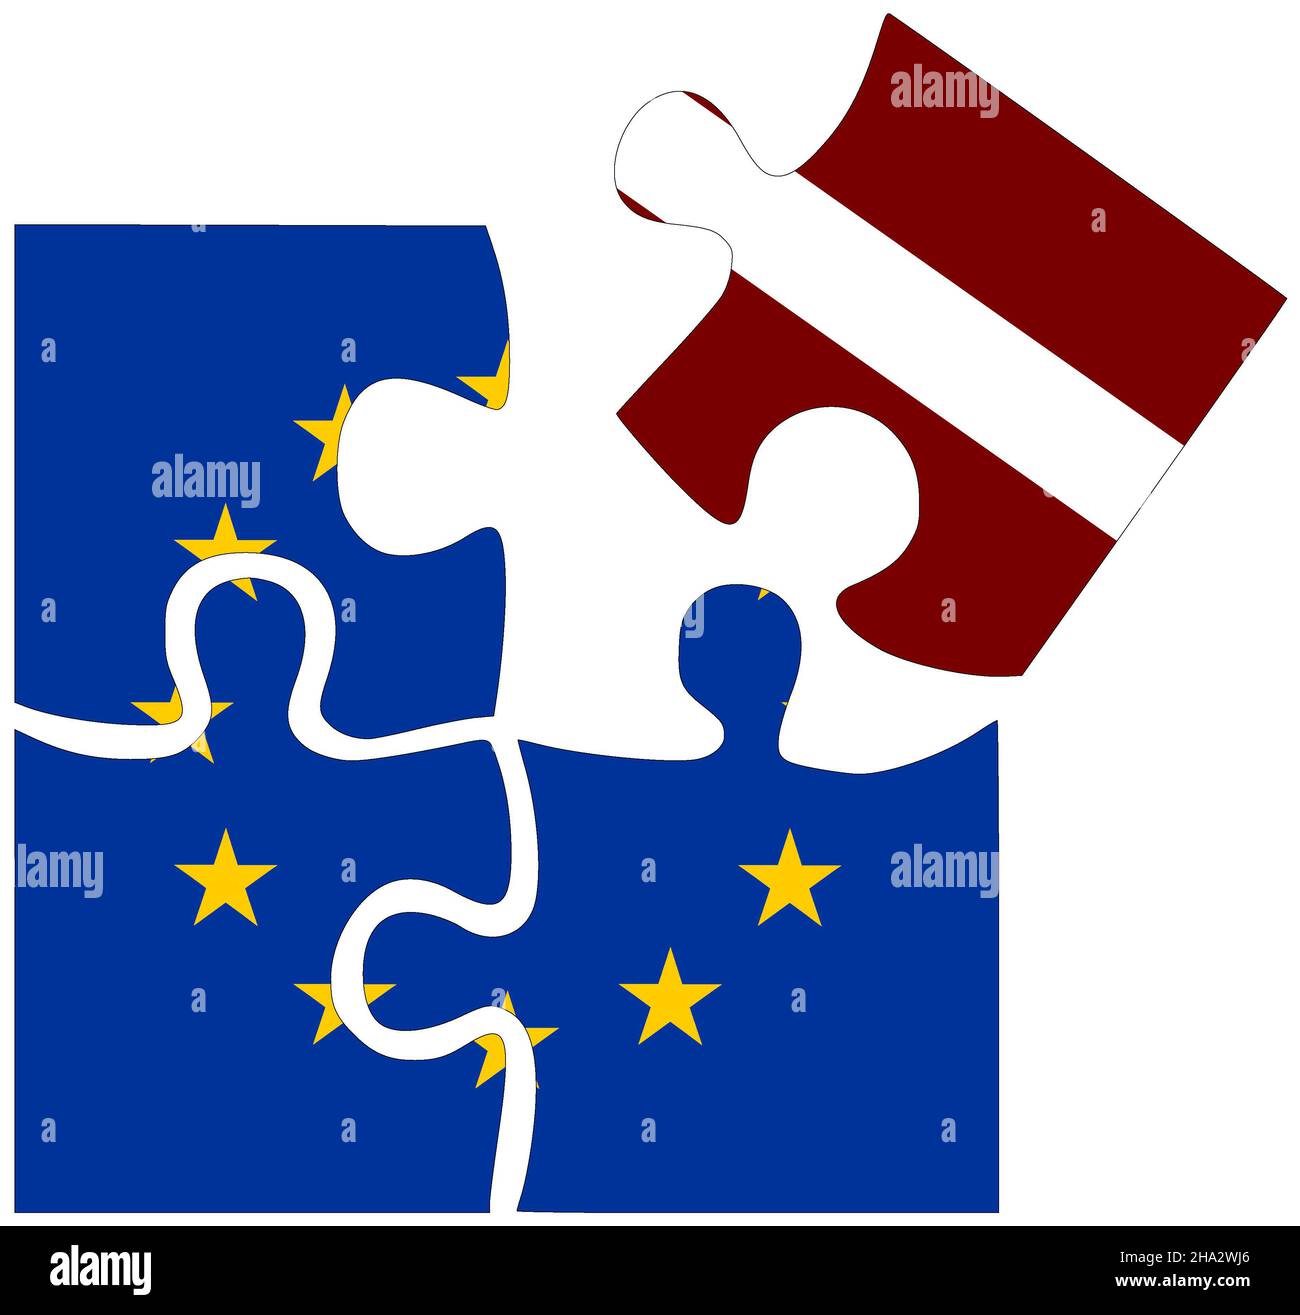 EU - Latvia : puzzle shapes with flags, symbol of agreement or friendship Stock Photo